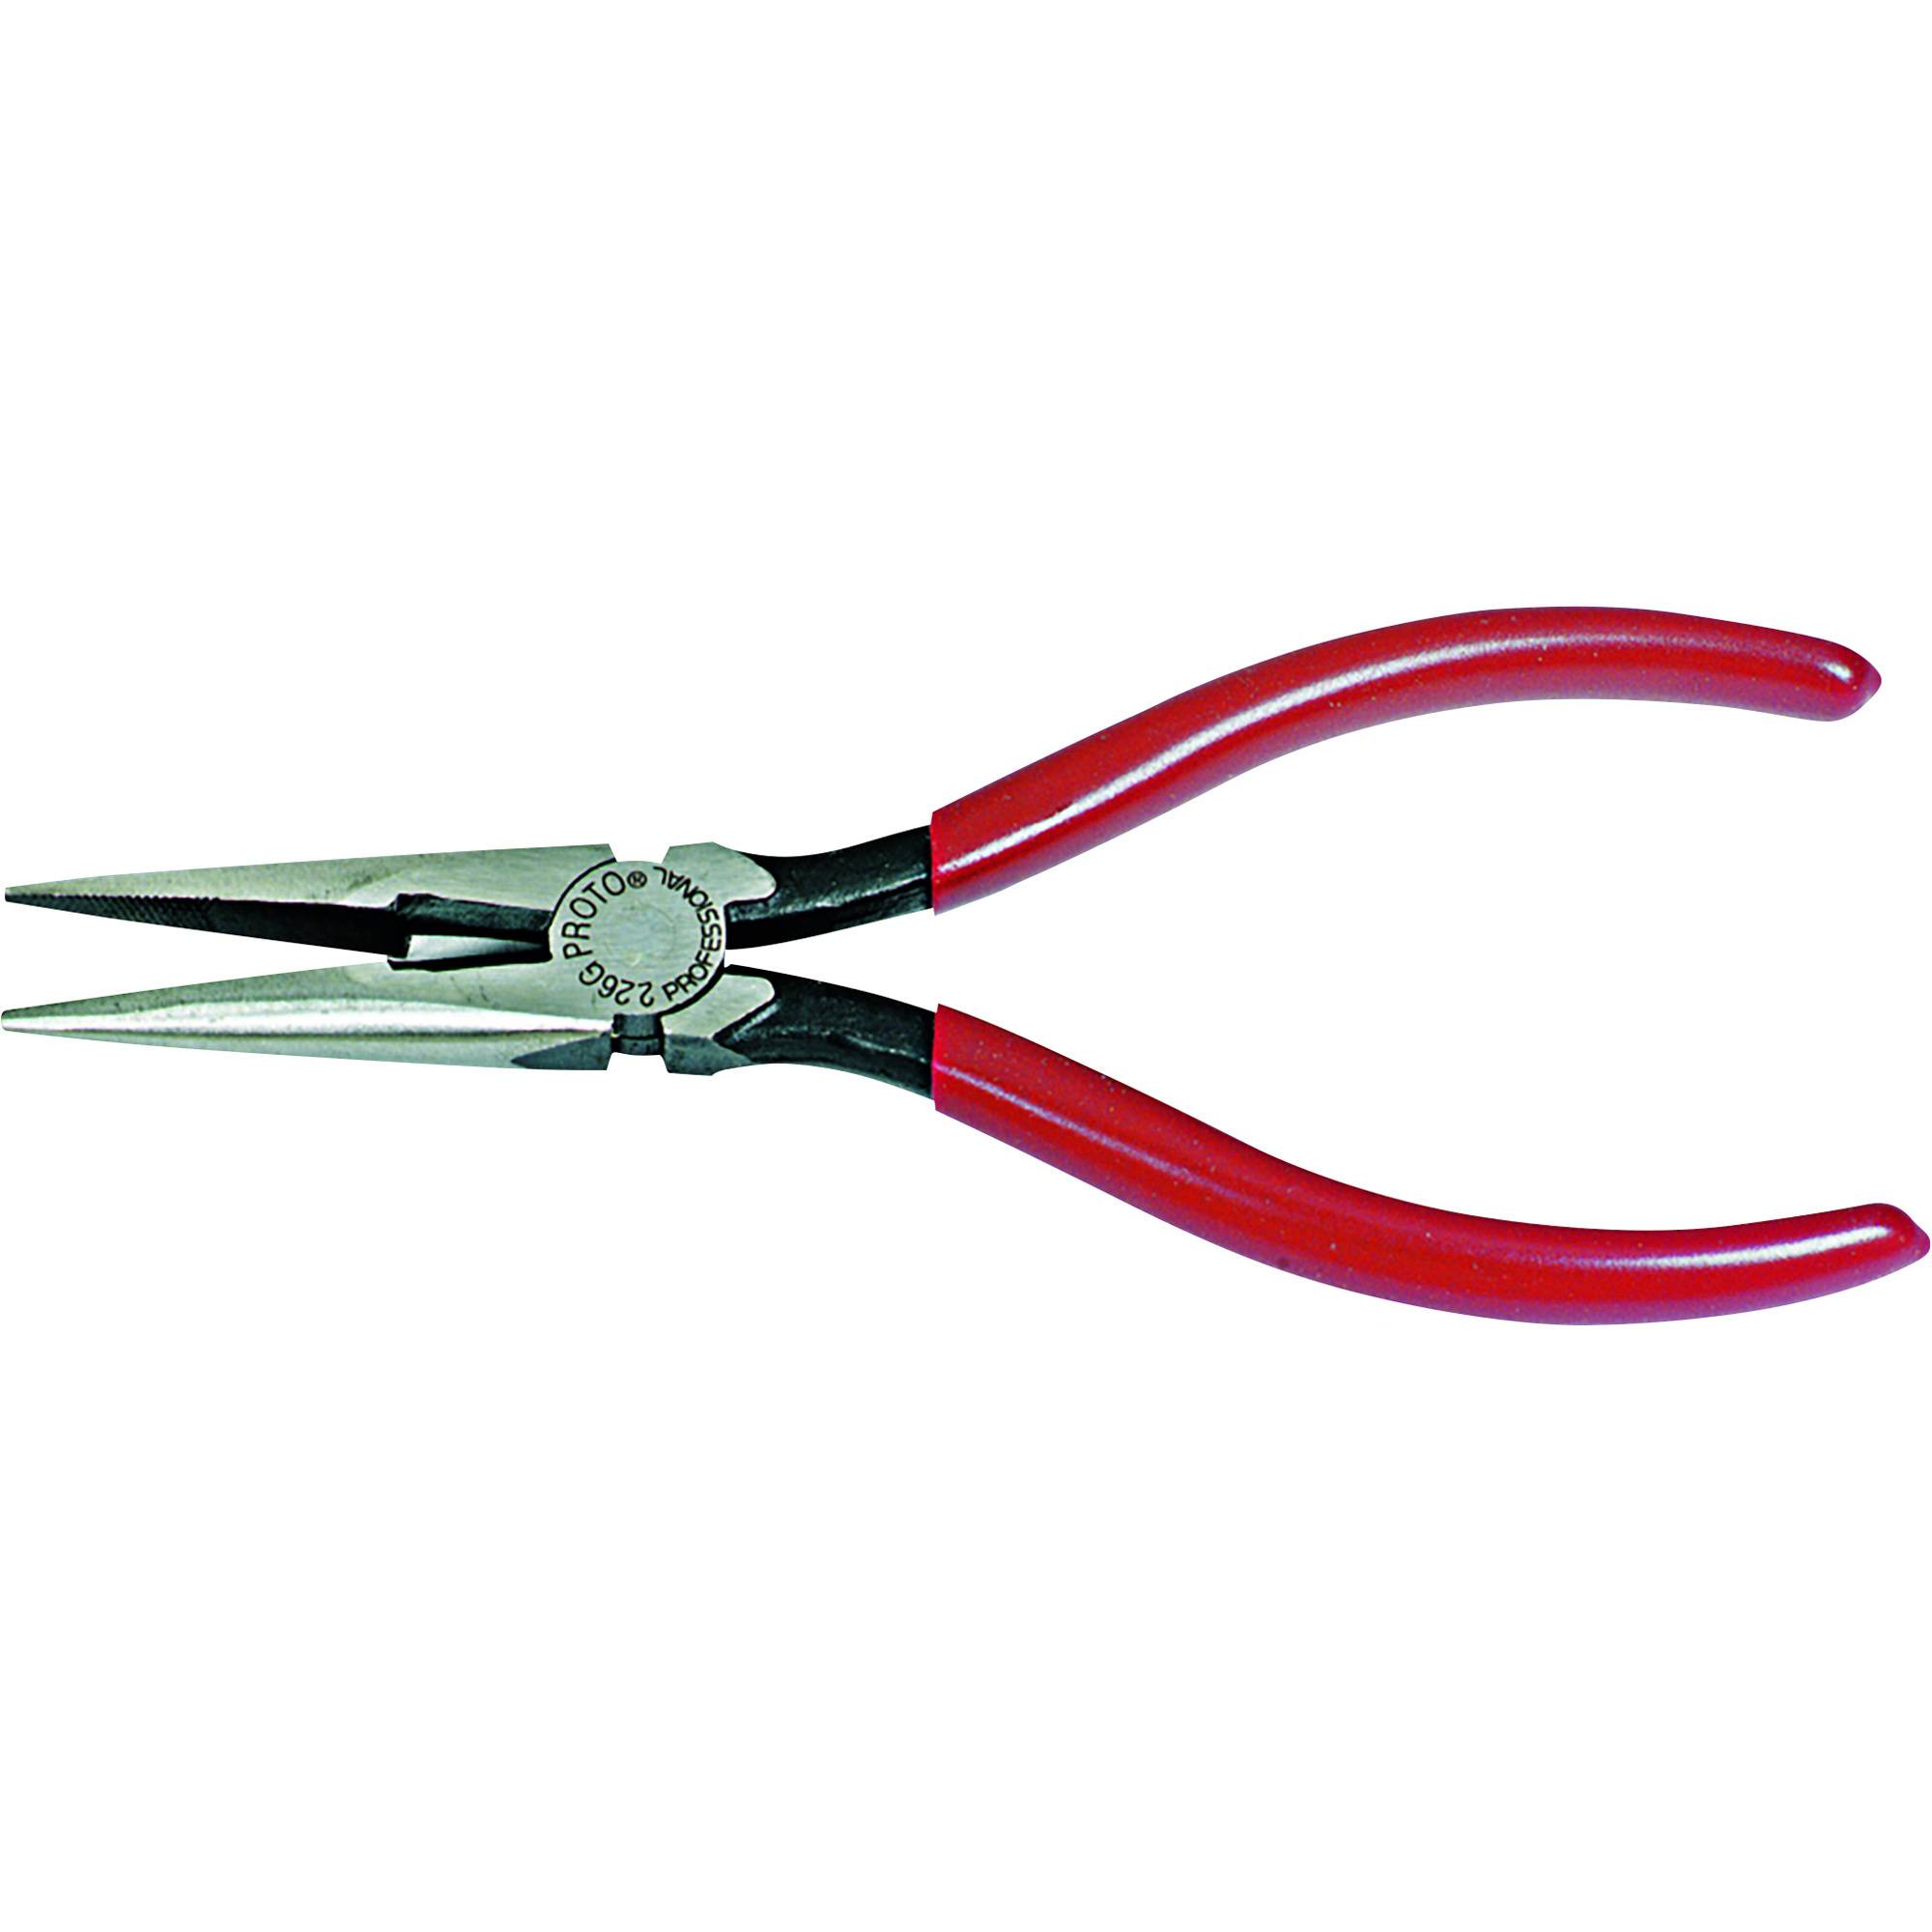 Proto Long Nose Pliers with Side Cutter, 6 5/8Inch, Model J226-01G